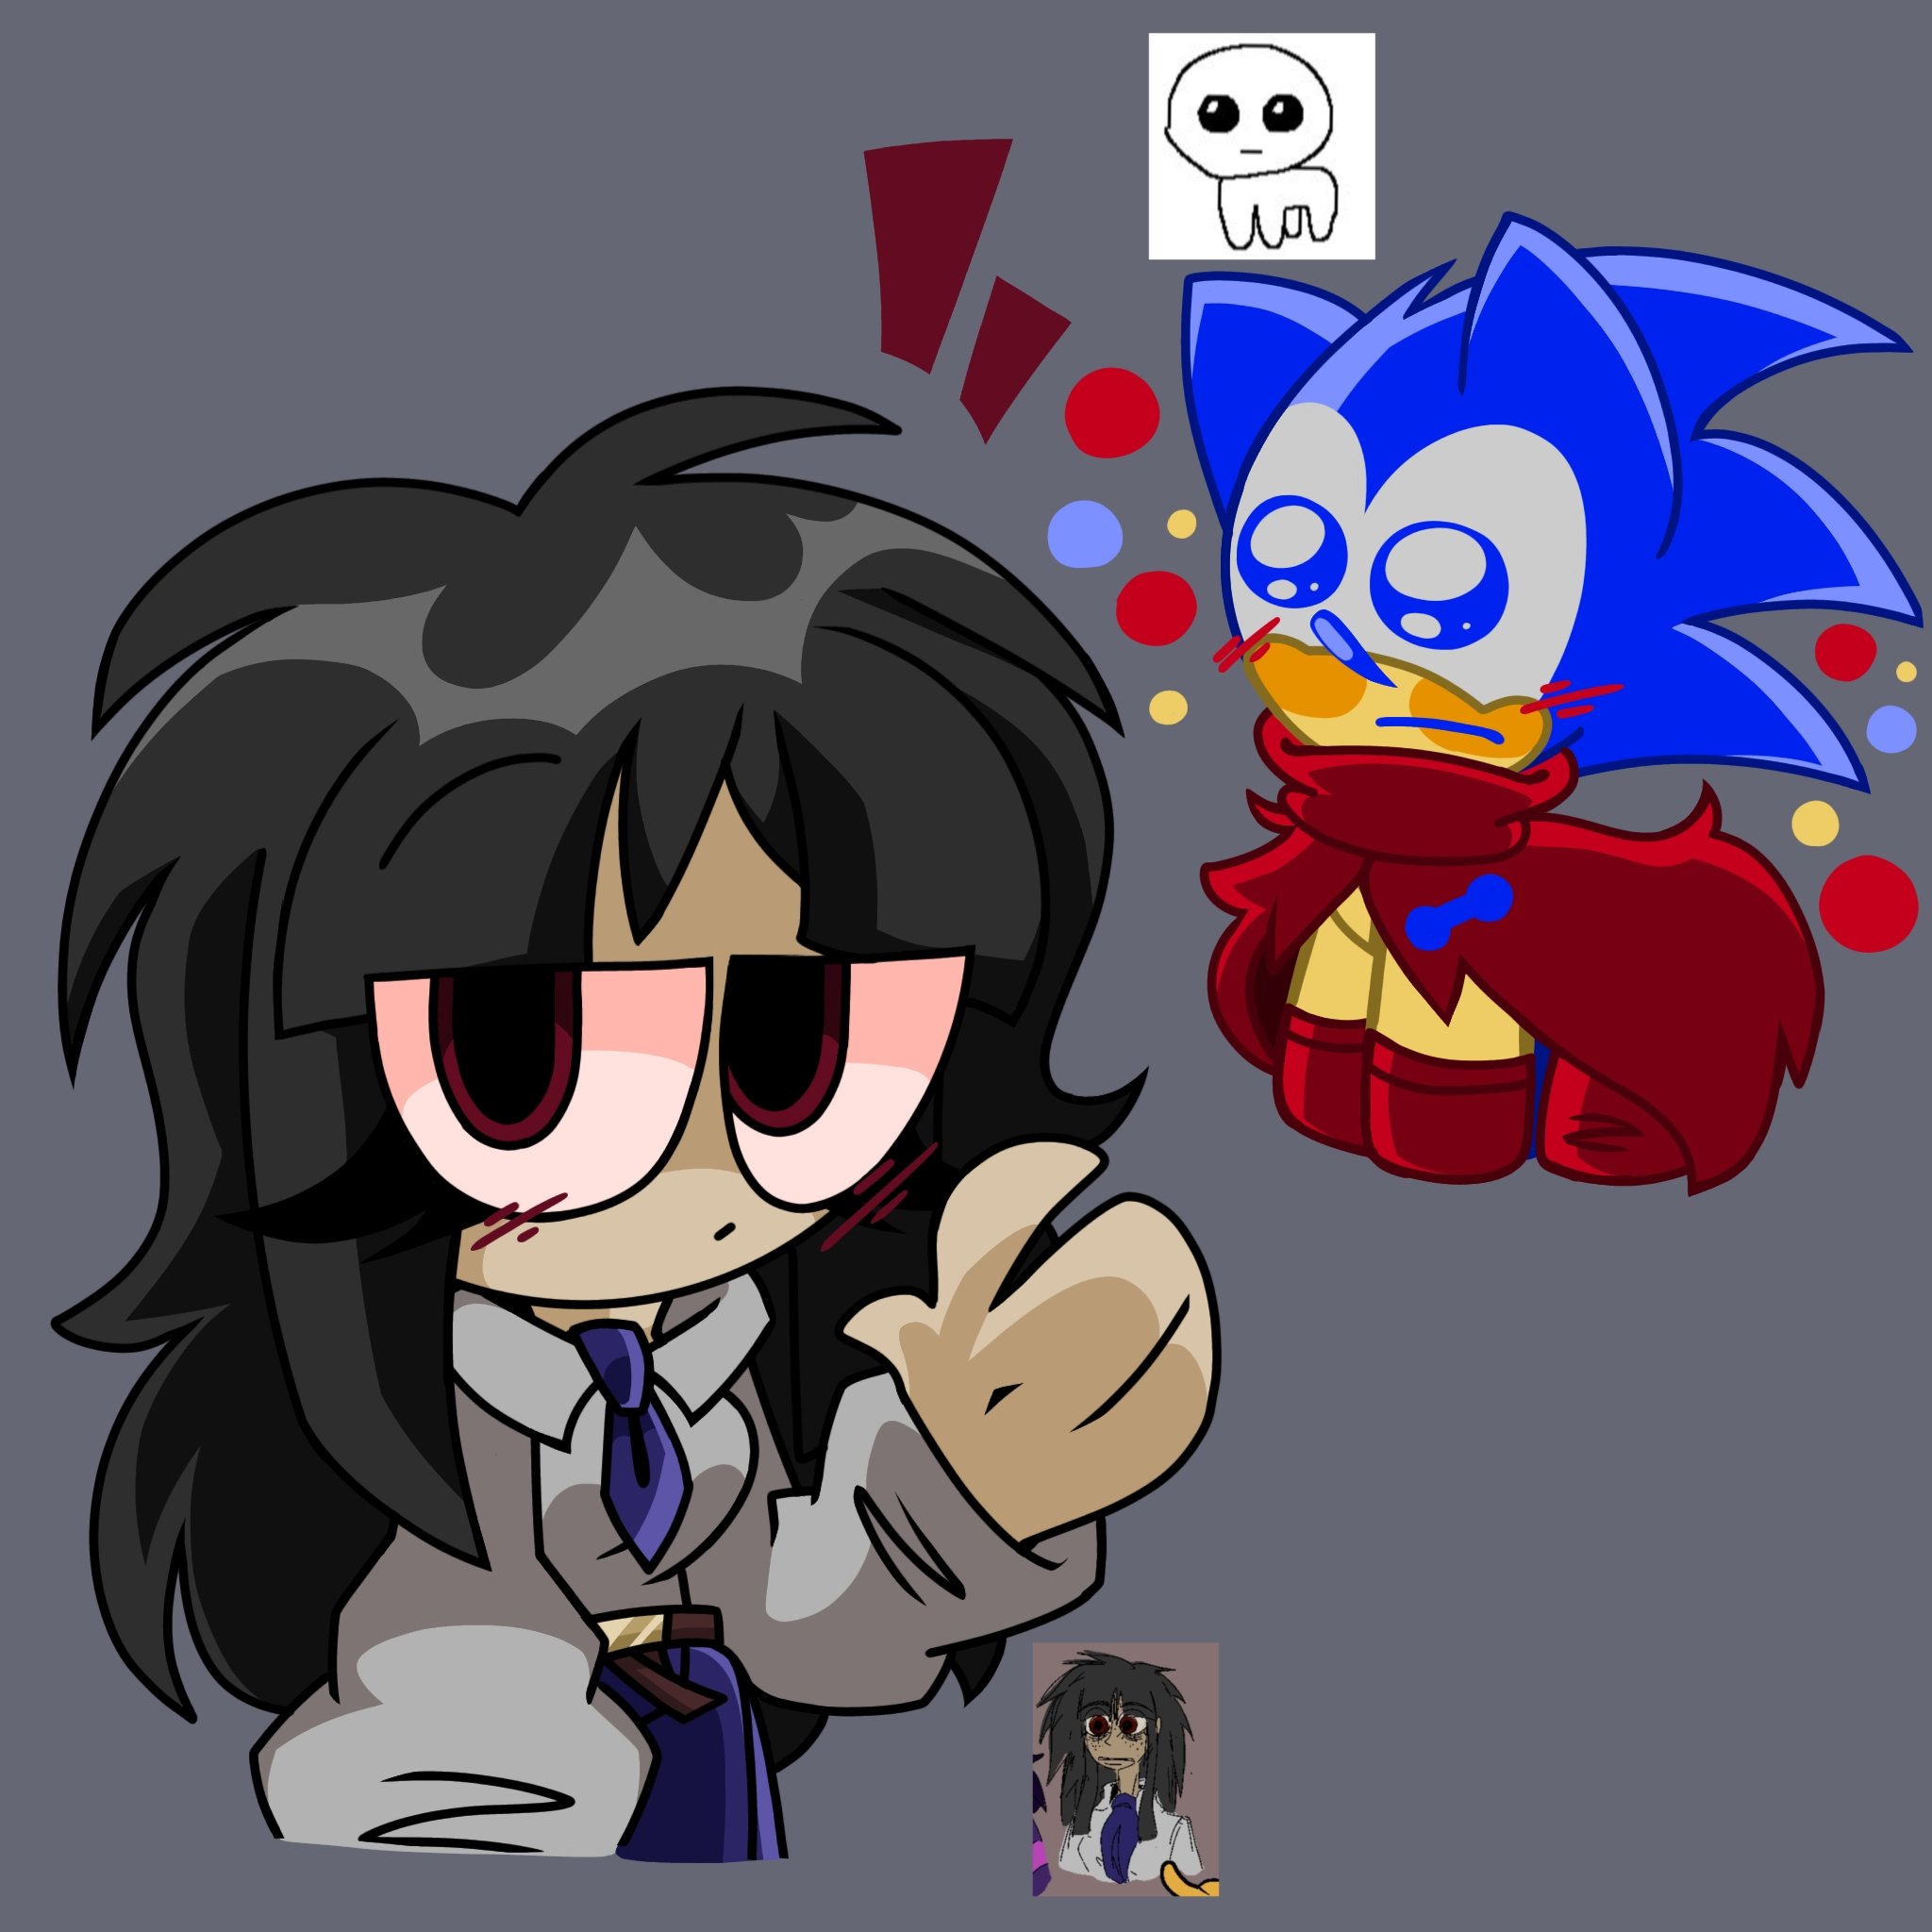 💙Danny_KirbyDraws 503💙(Eimy) on X: Uhhh just amy (Sally.EXE Continued  Nightmare) and Exetior only because yes? Lmao, they are cool even if the  both are enemiesss Idk why i love them and why